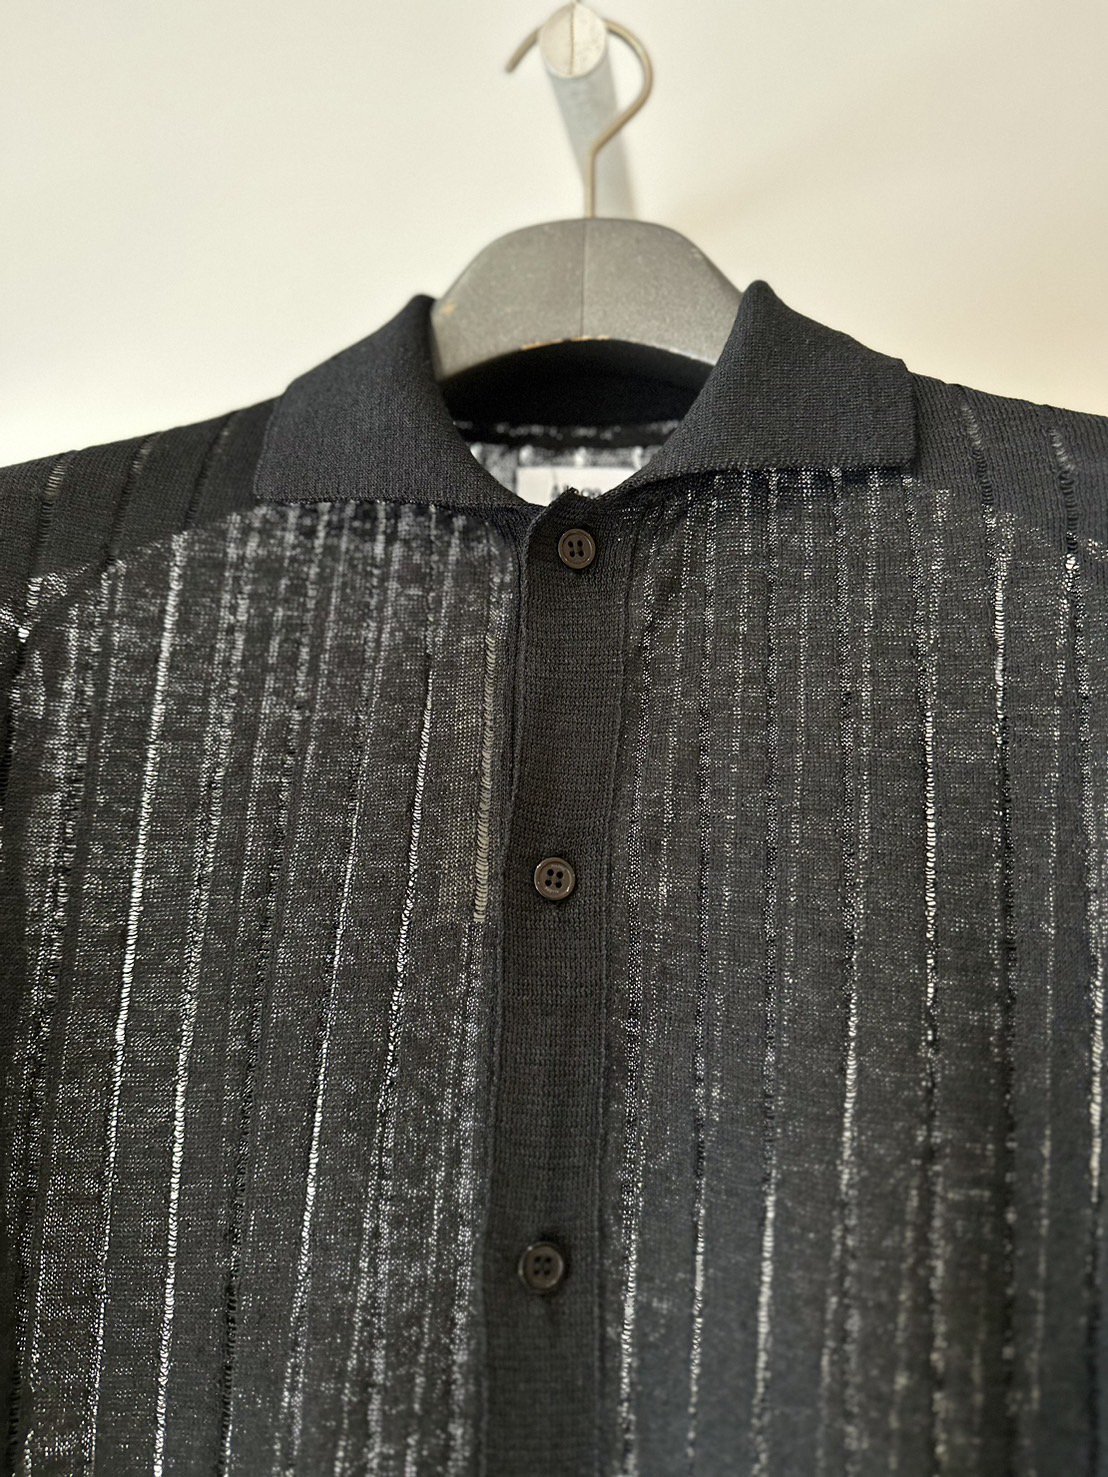 ALLEGE<br />Linen S/S Knit Shirt / Black<img class='new_mark_img2' src='https://img.shop-pro.jp/img/new/icons14.gif' style='border:none;display:inline;margin:0px;padding:0px;width:auto;' />